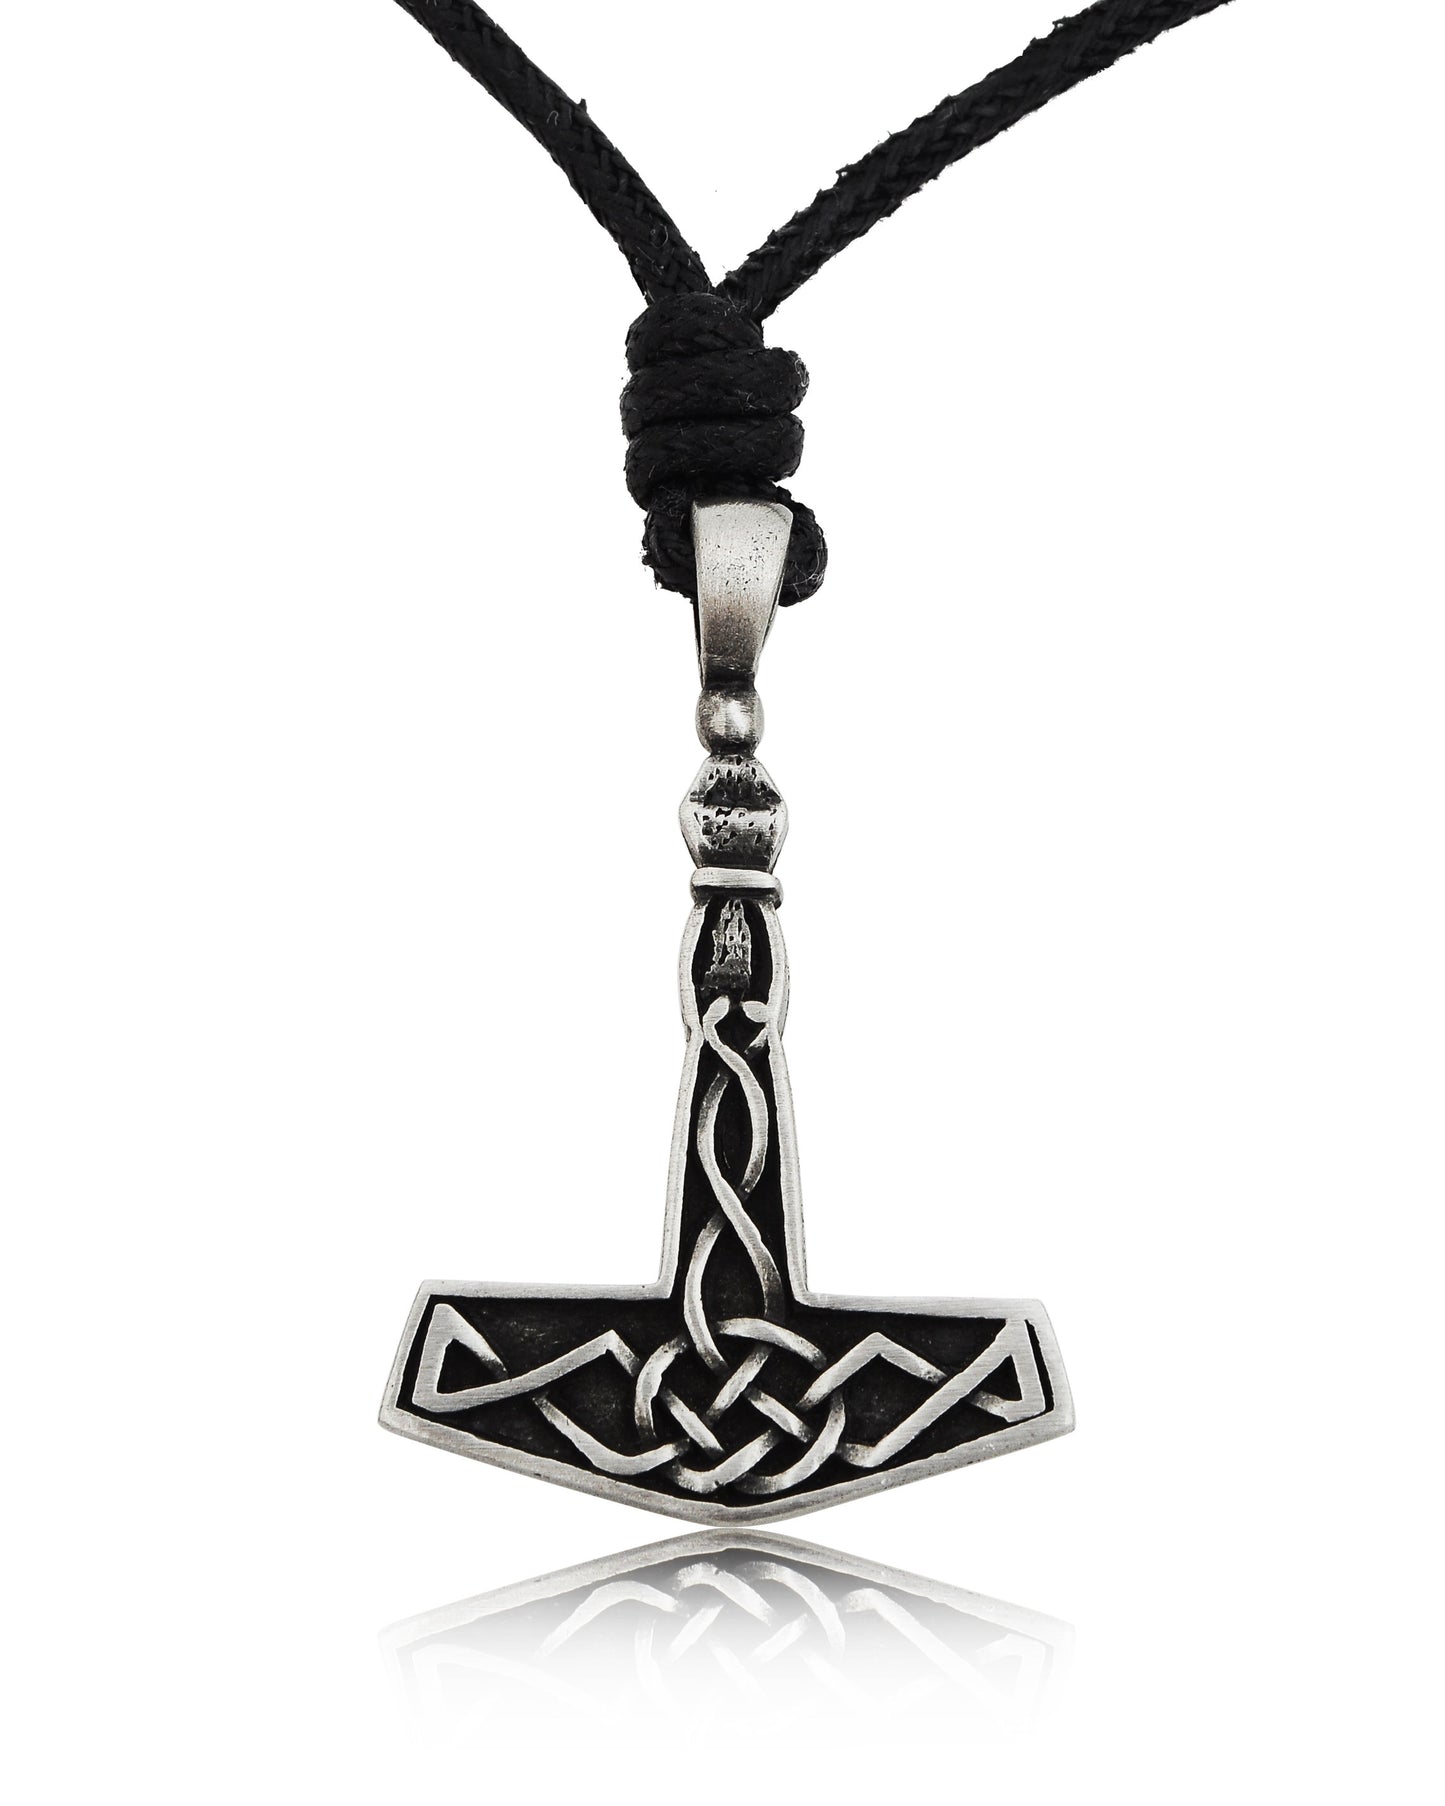 God's Hammer Silver Pewter Charm Necklace Pendant Jewelry